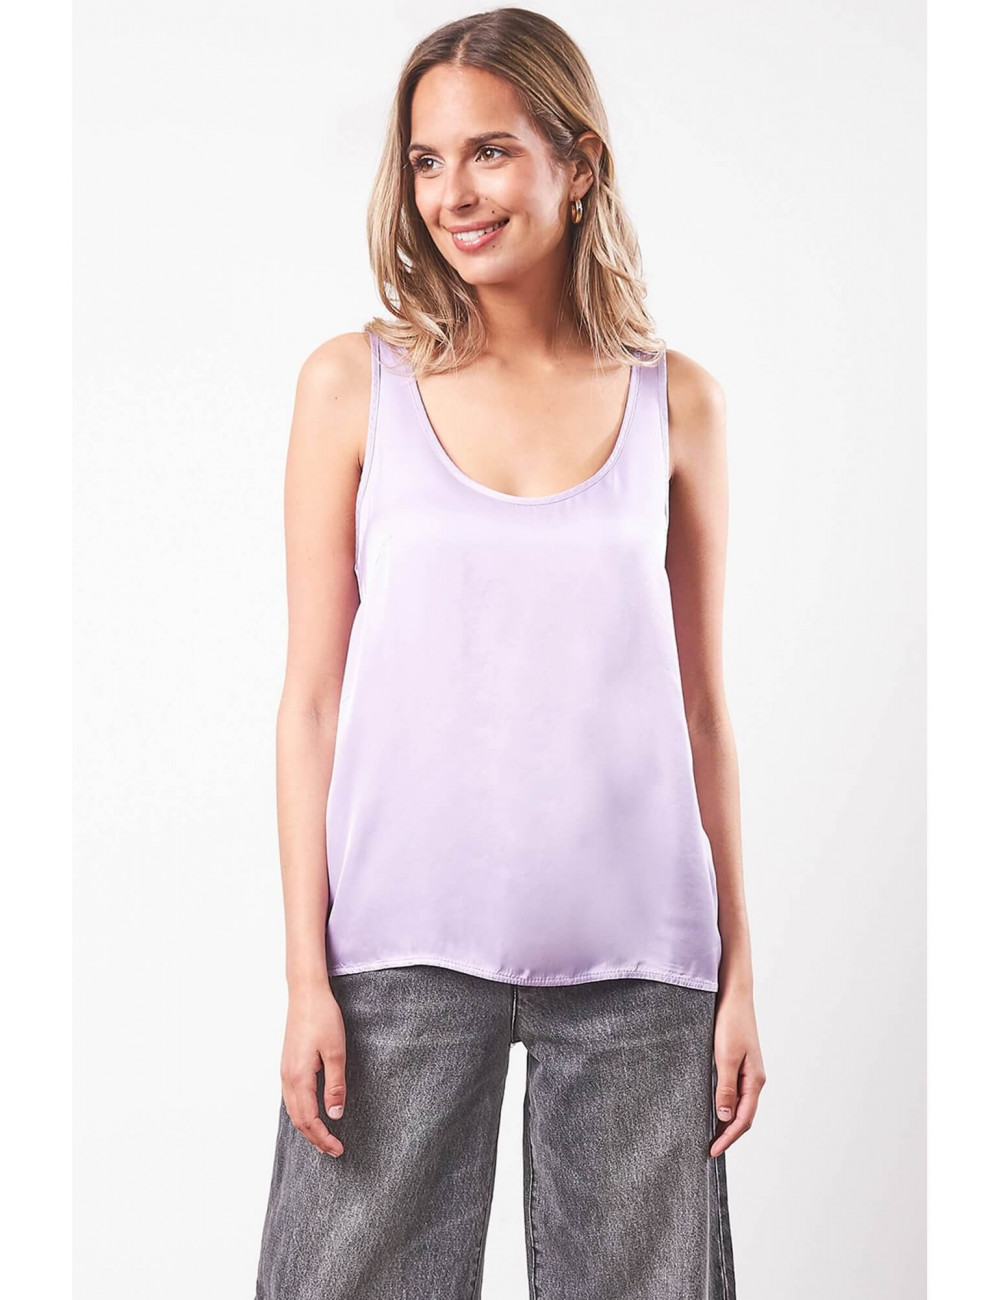 Top with thin straps - Love@me -  